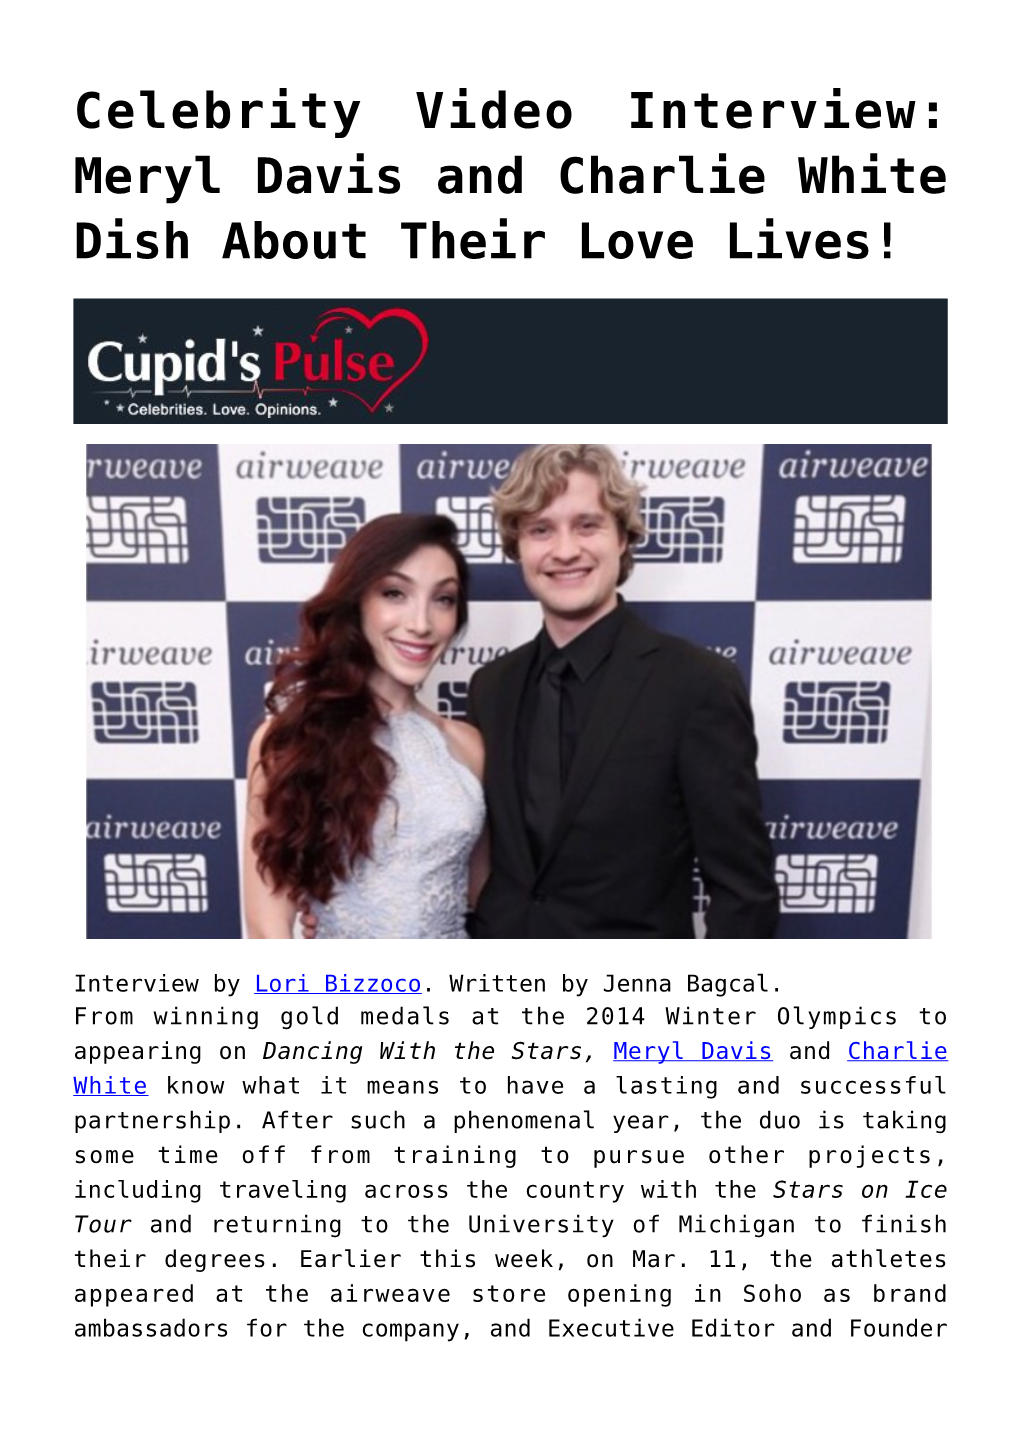 Celebrity Video Interview: Meryl Davis and Charlie White Dish About Their Love Lives!